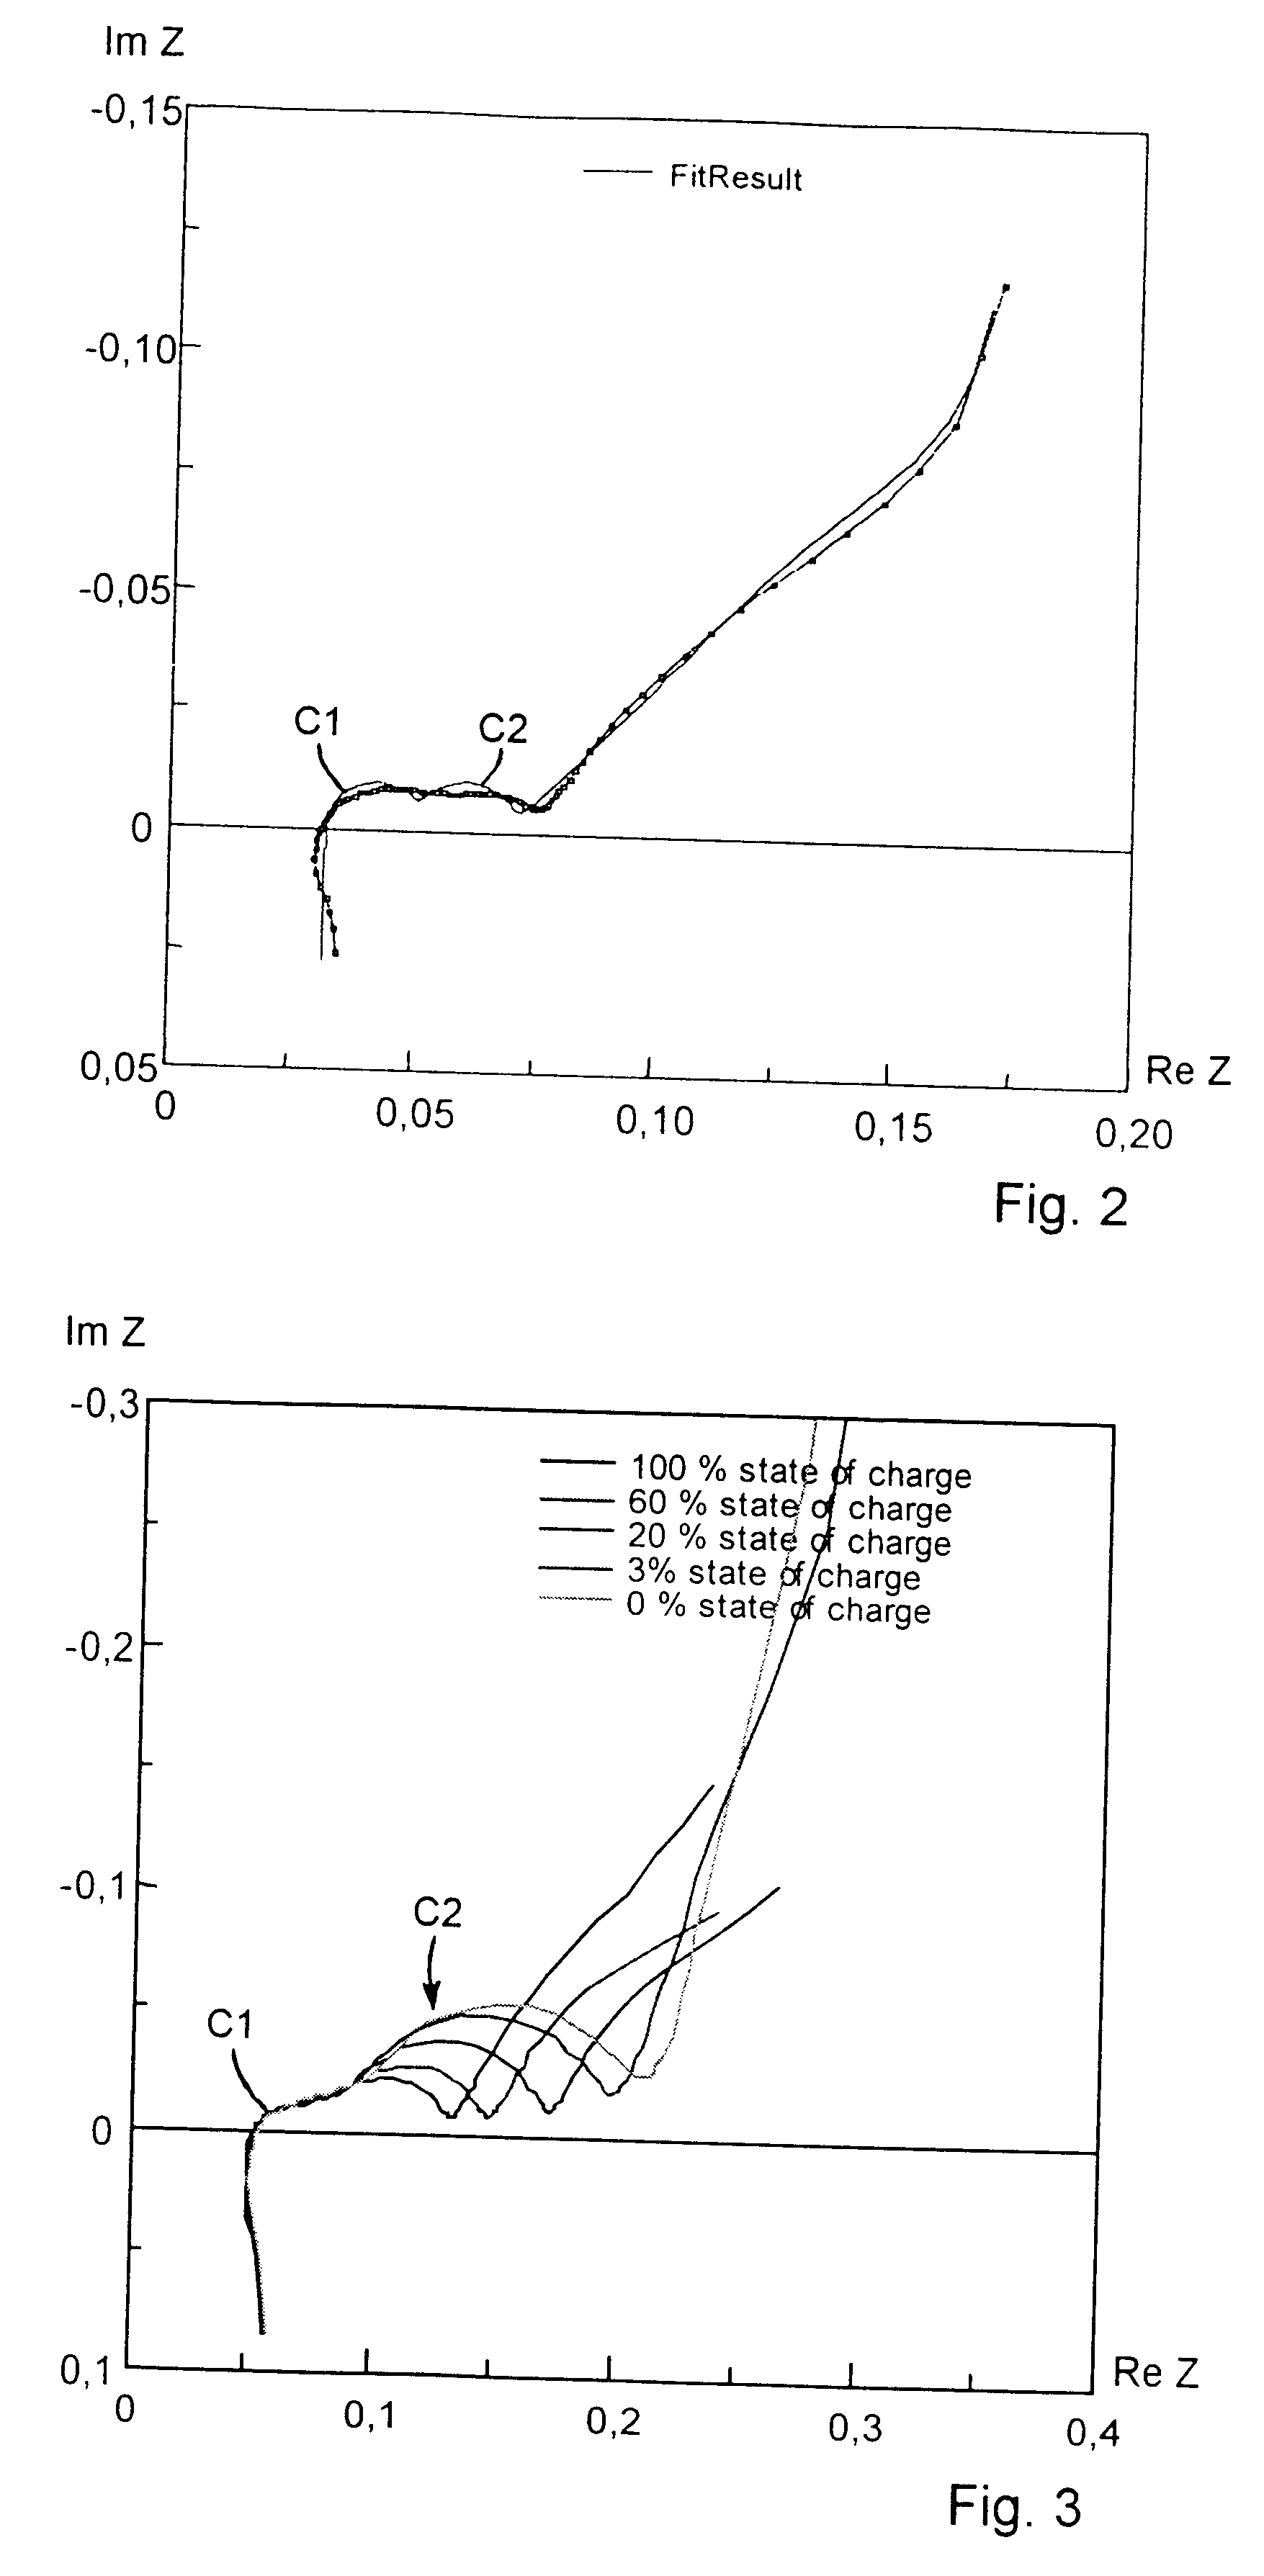 Battery operable device with battery state-of-charge indicator